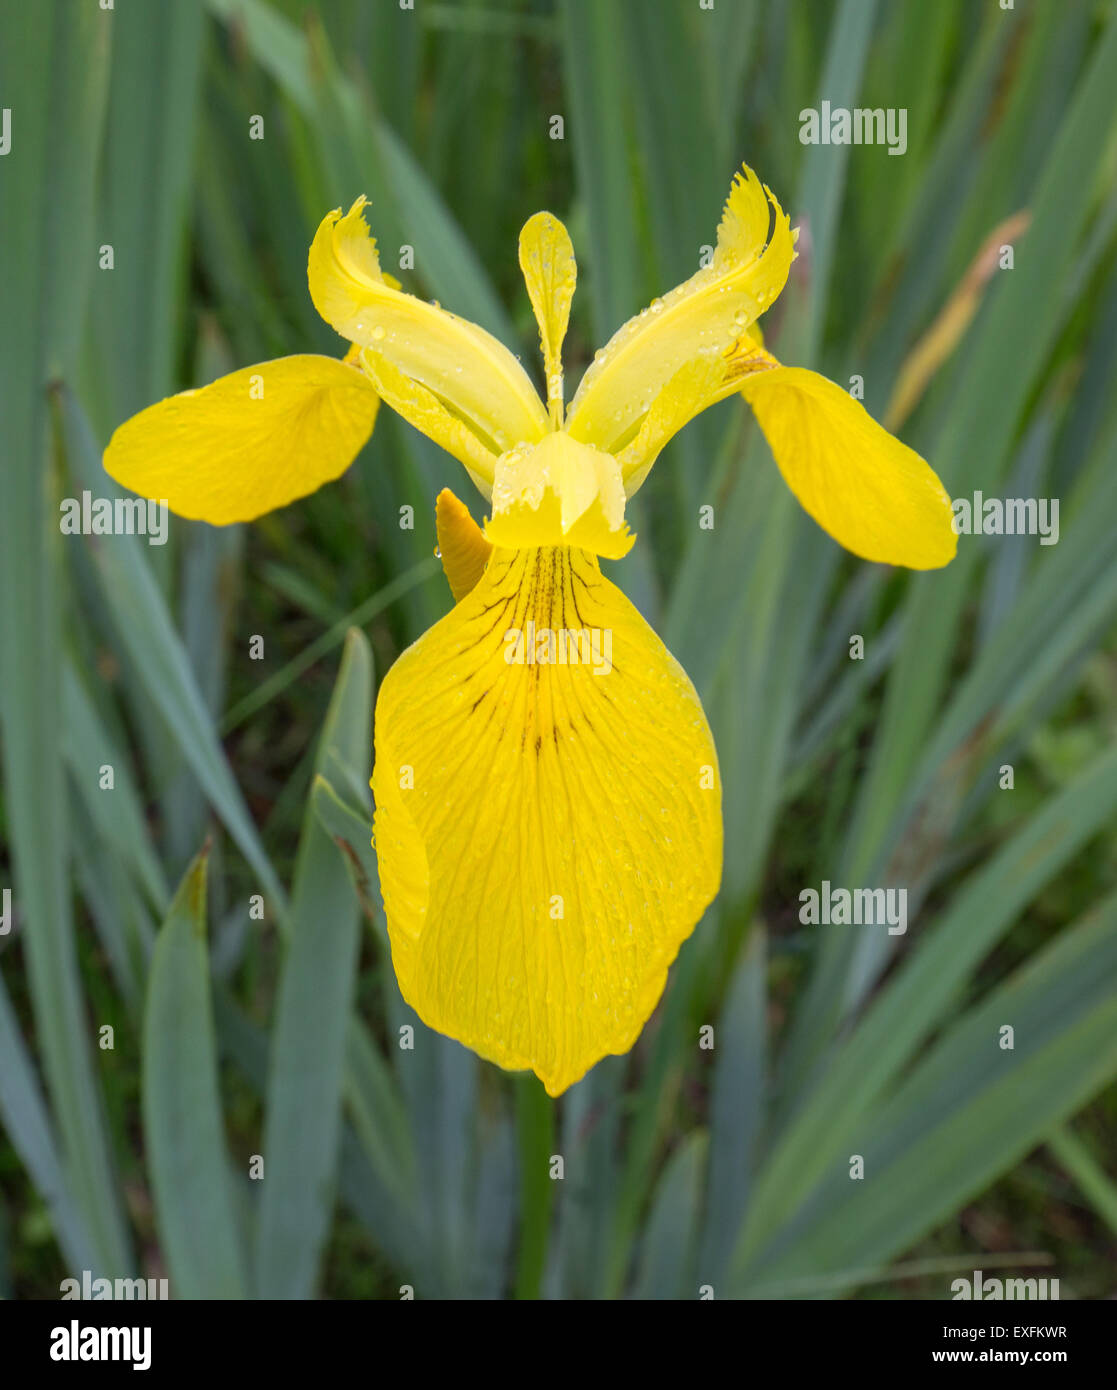 Yellow Flag or Iris flower detail - in wetlands at Kenfig Burrows on the South Wales coast UK showing the three part structure Stock Photo